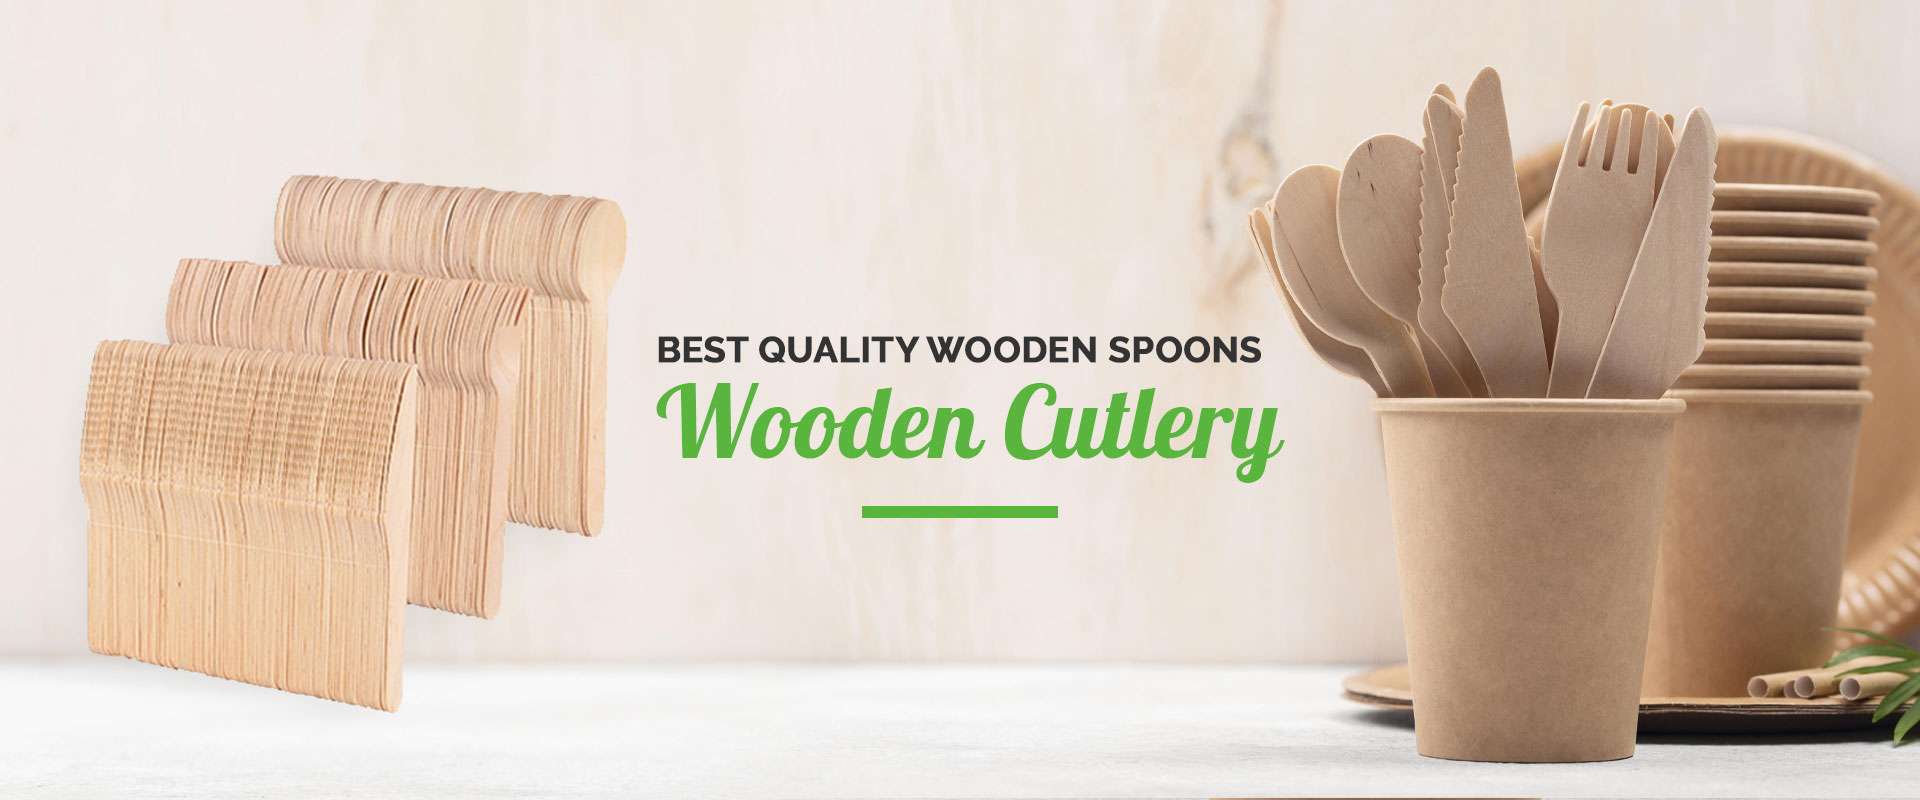  Wooden Cutlery Manufacturers in Kanpur